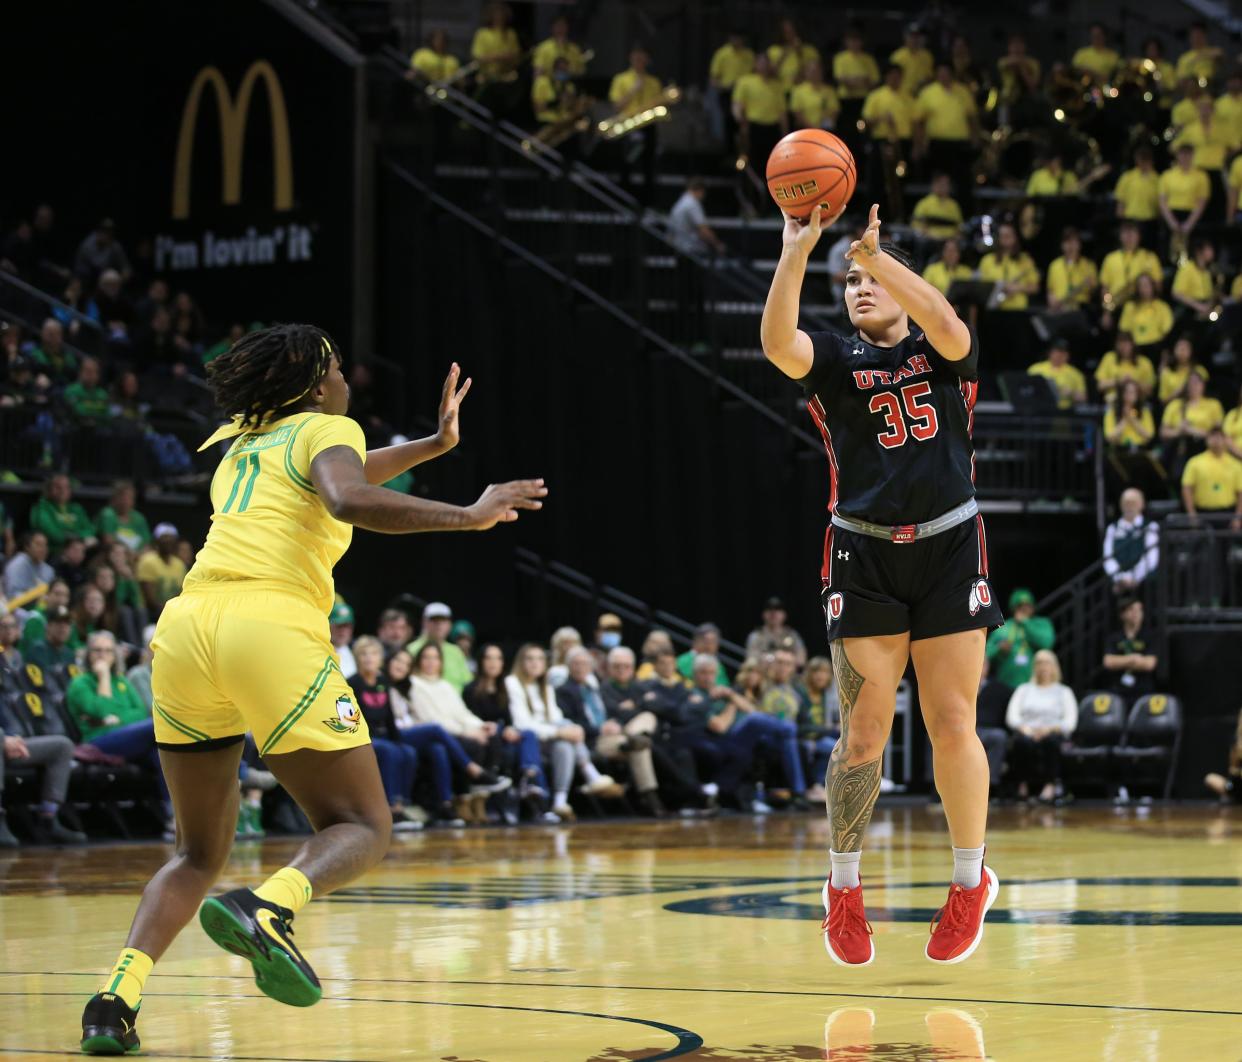 Utah's Alissa Pili, right, shoots over Oregon's Taylor Hosendove during the first half in Eugene Sunday, Feb. 5, 2023.